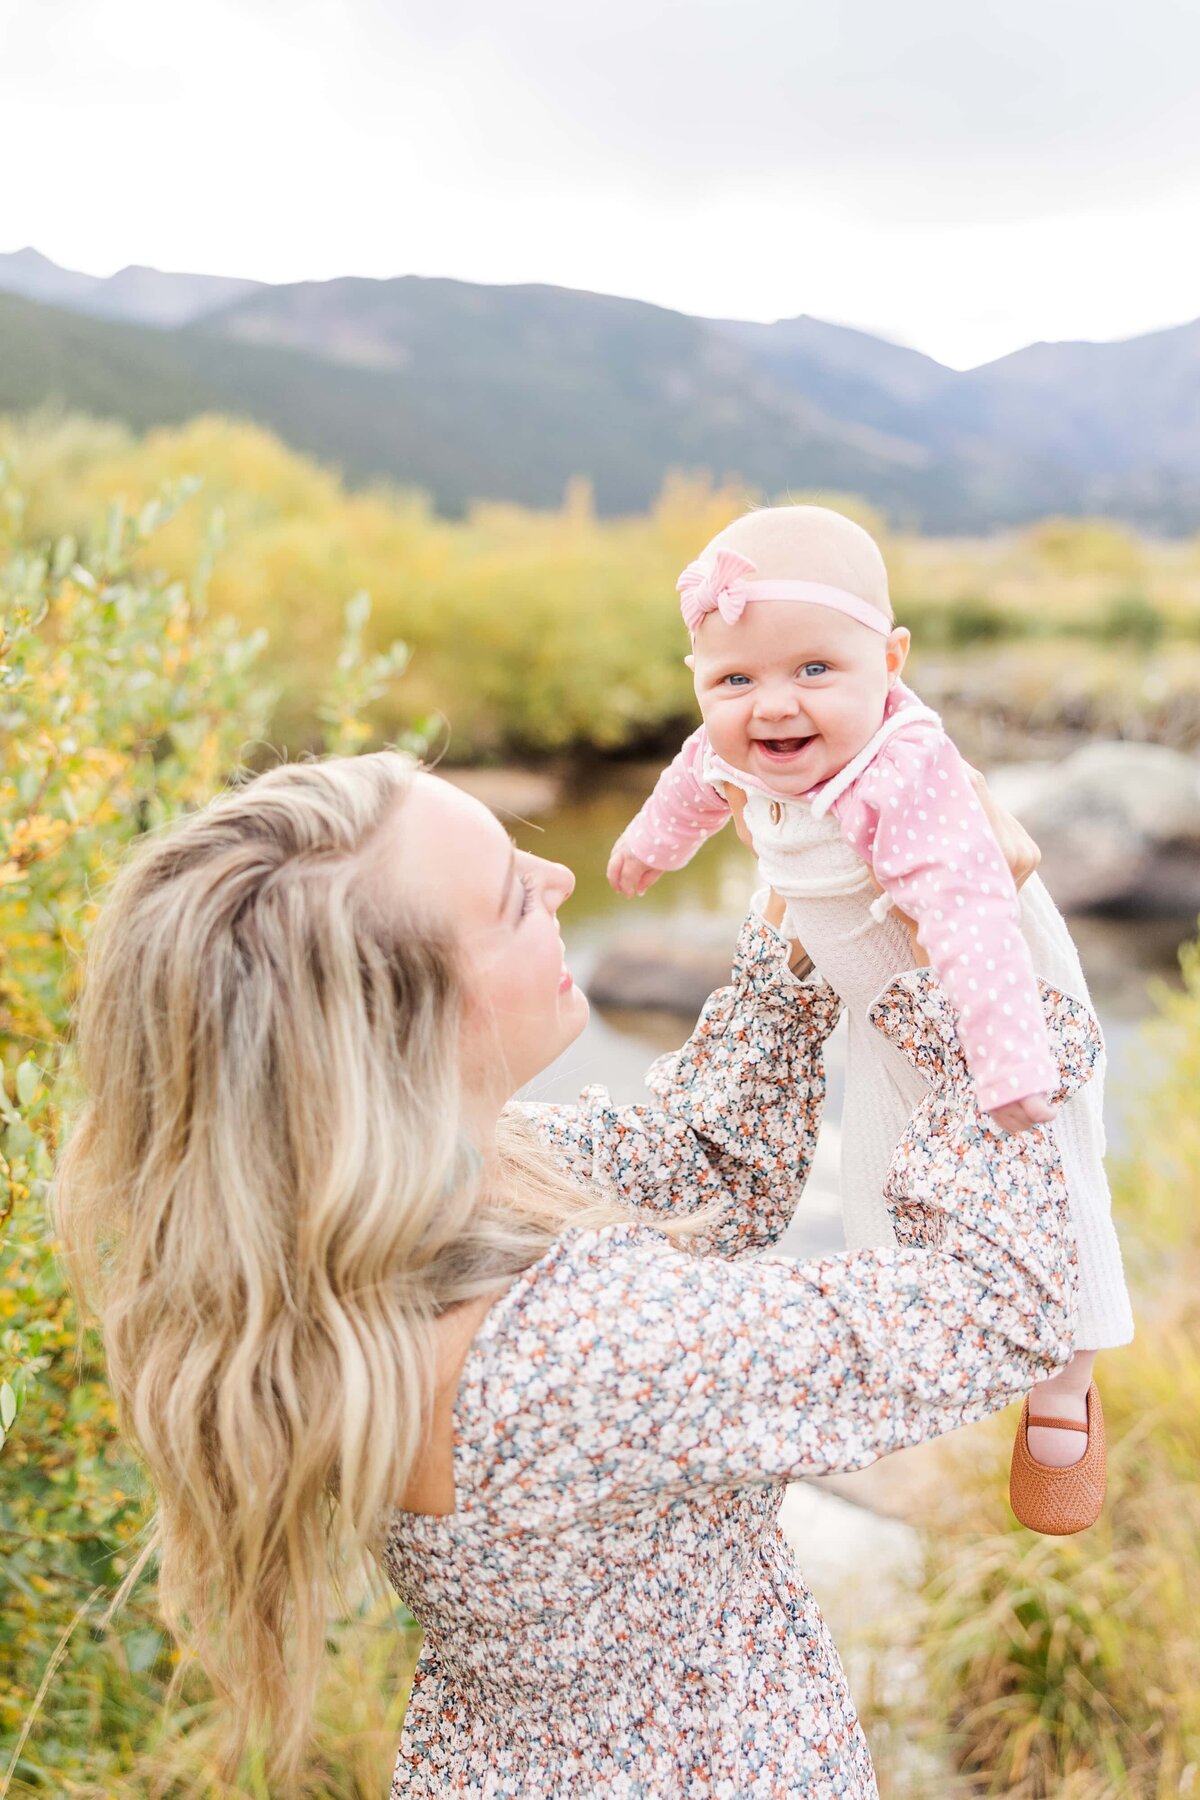 Mom is hold baby girl in the air while baby is laughing in Colorado